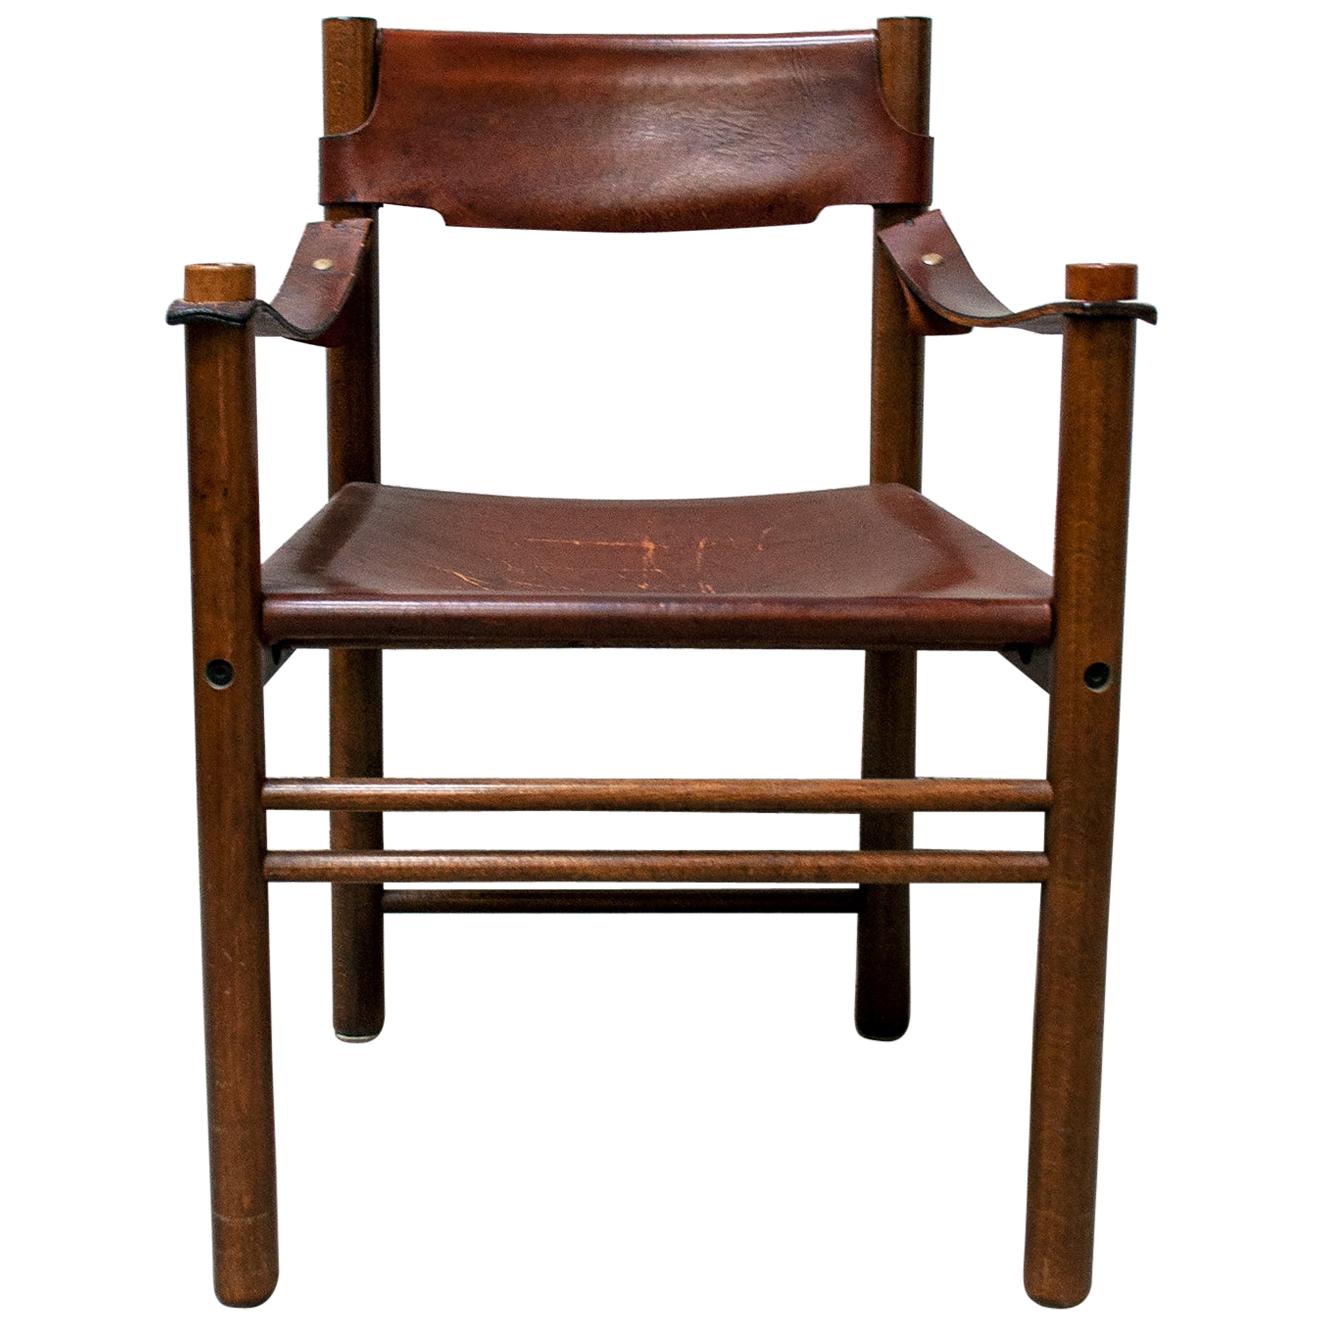 Vintage Armchair in Wood and Leather by Ibisco Chair, Italy, 1960s For Sale